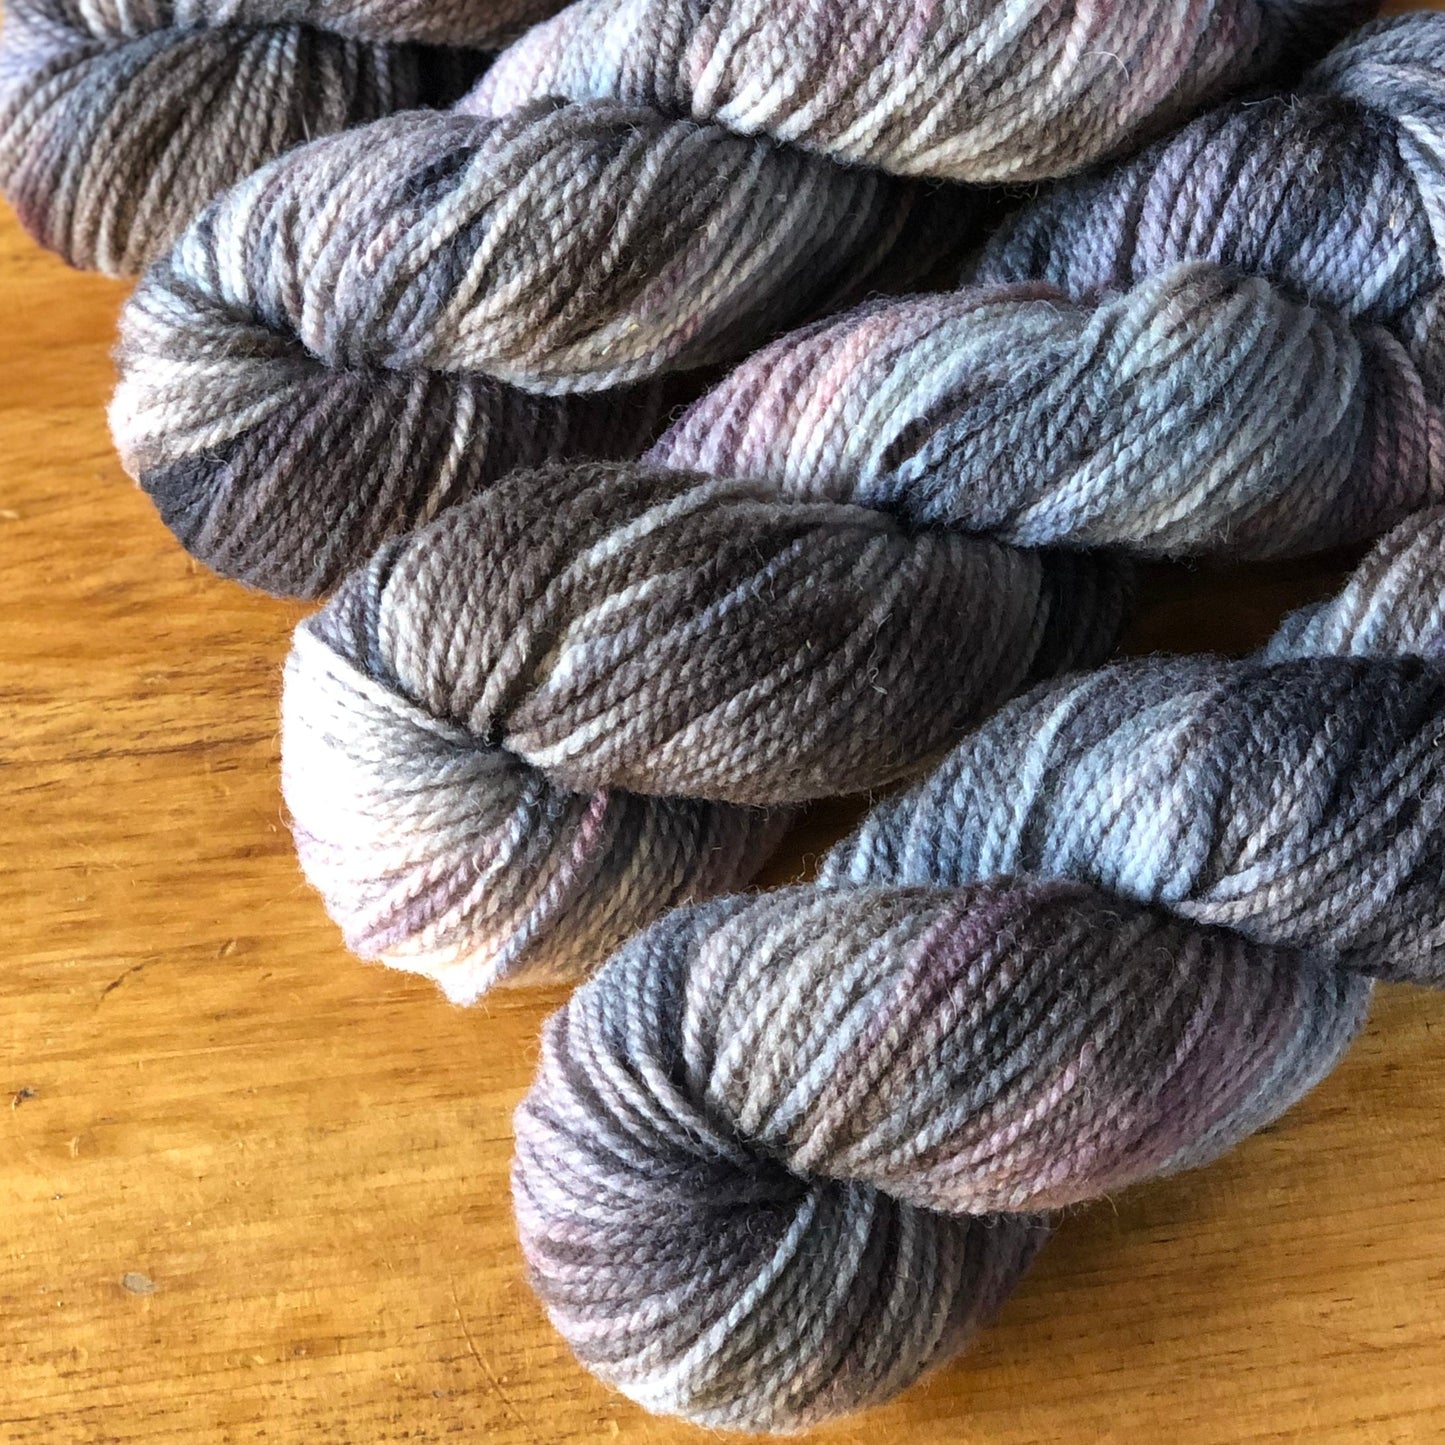 Worsted Weight (4) Yarn, 100% Wool, Hand Dyed "Fieldstone" Colourway